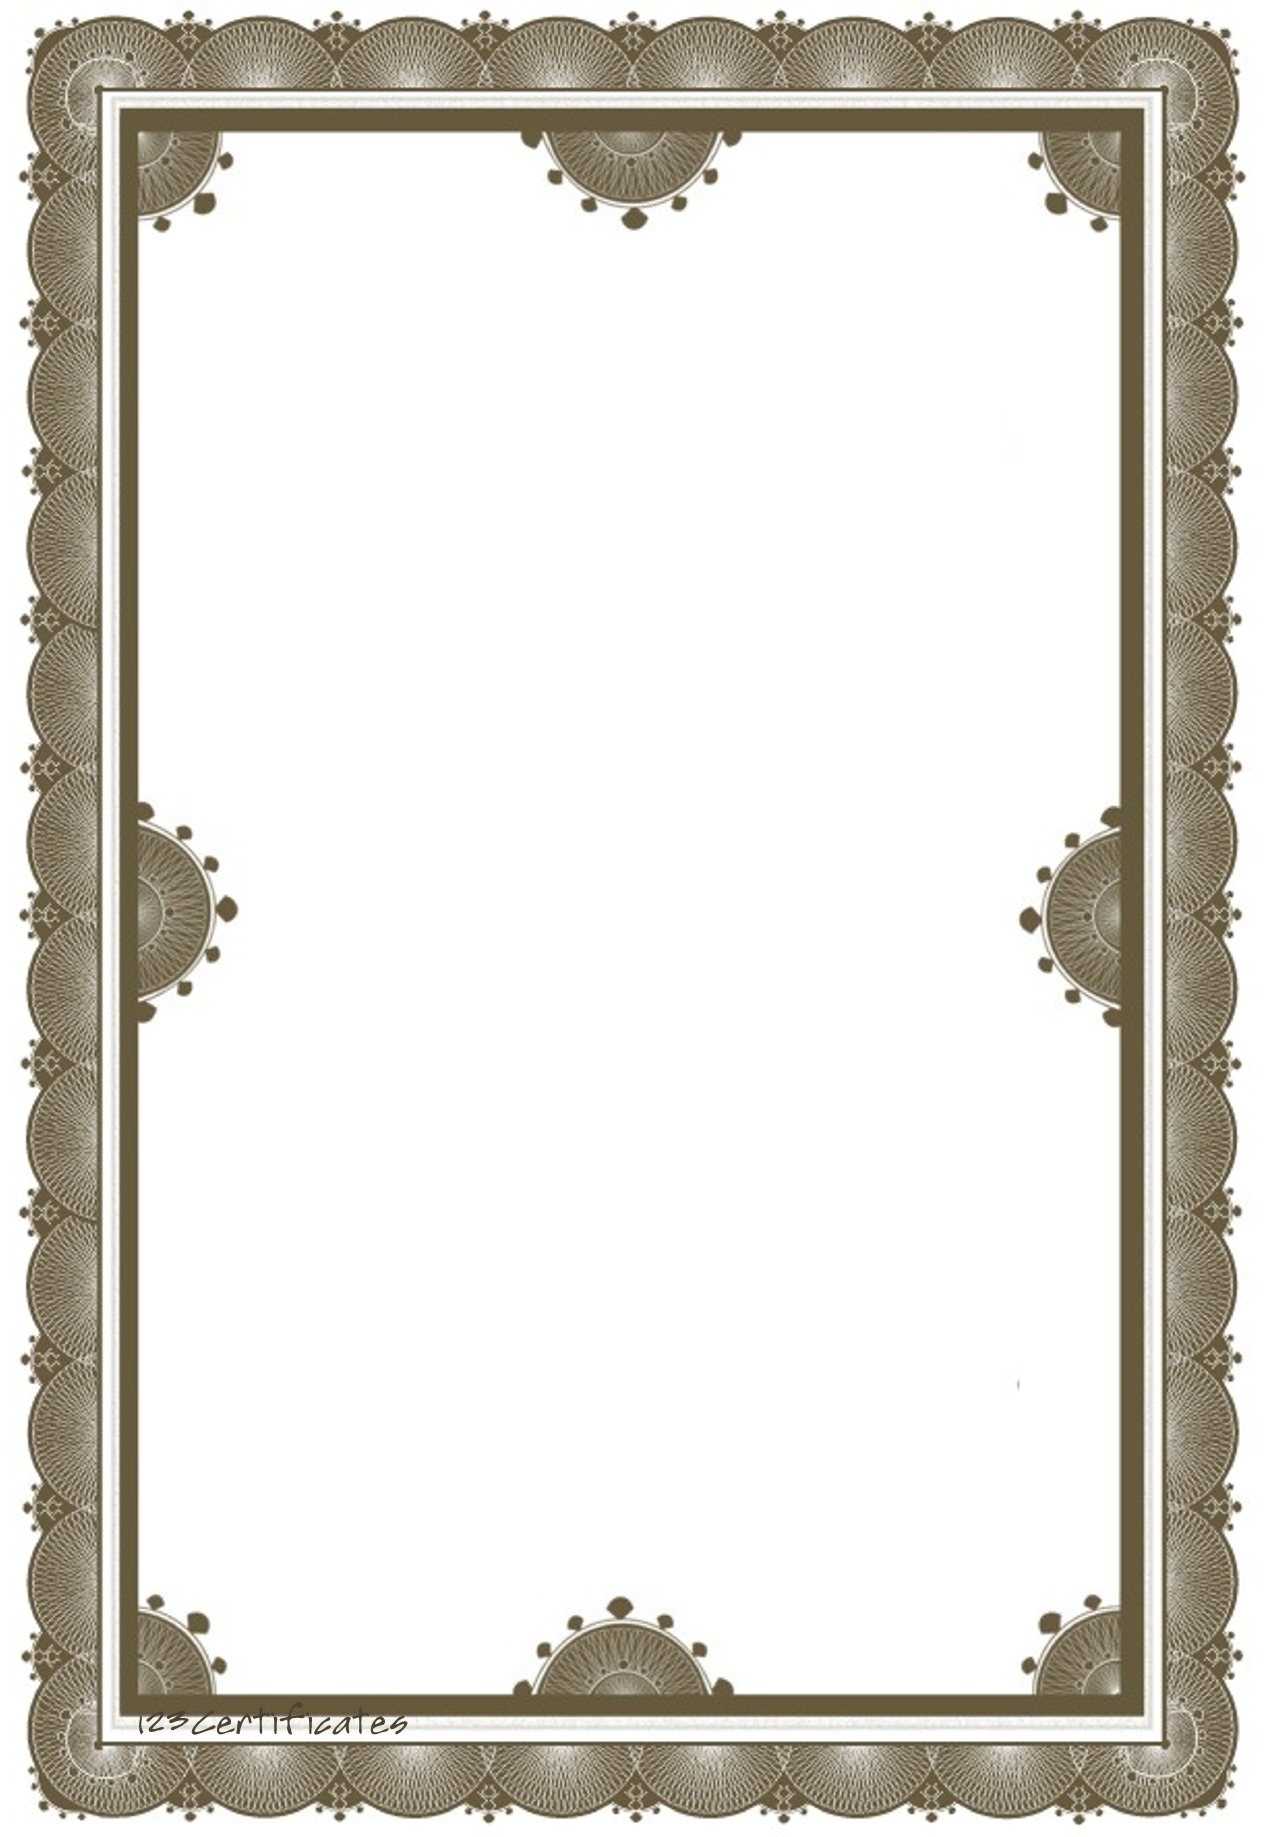 Page Border Download Free - Clipart library